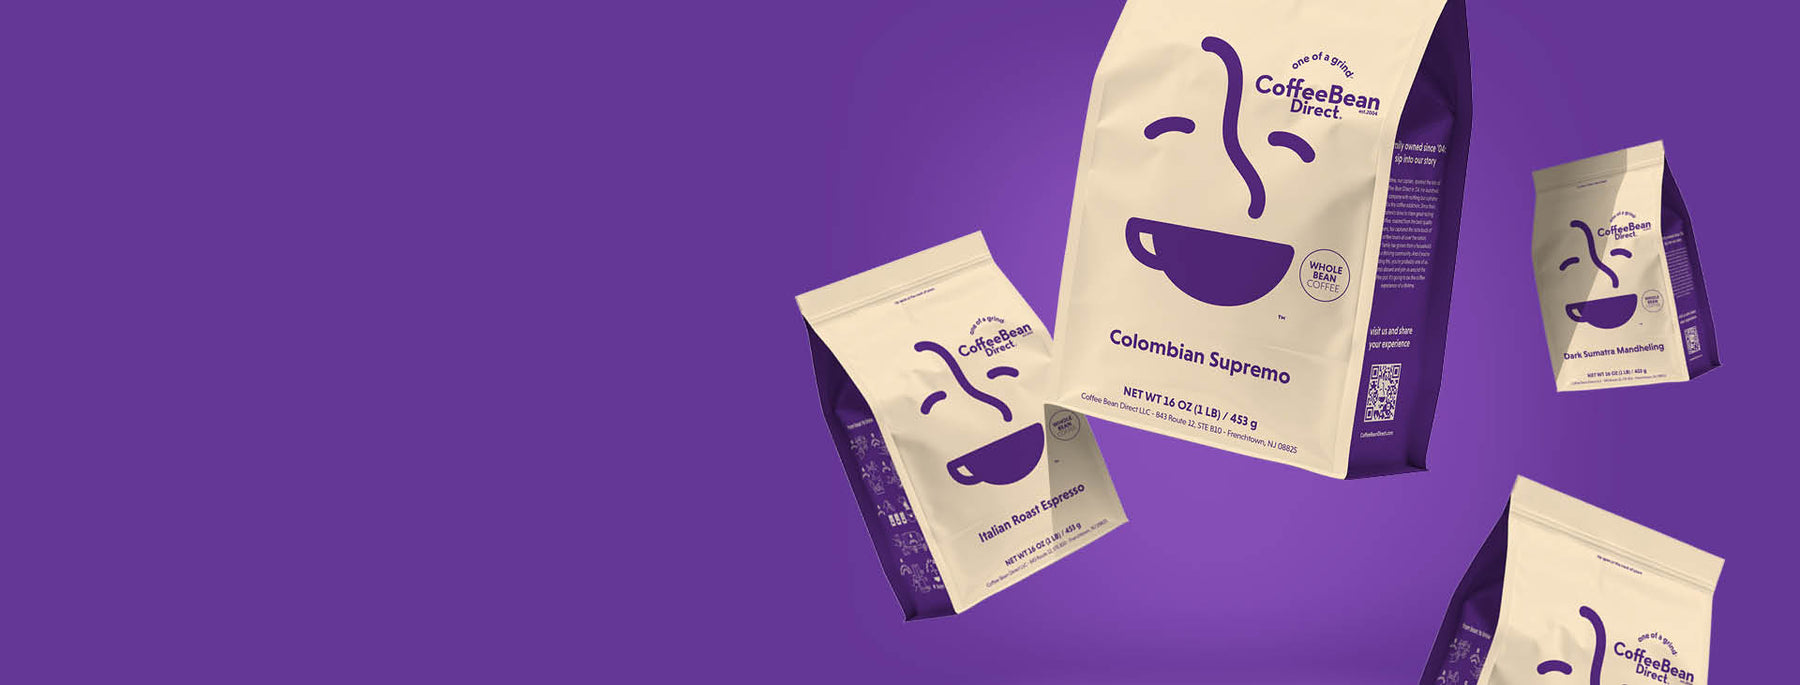 About Us -- assortment of Coffee Bean Direct rebranded coffee bags on a purple background